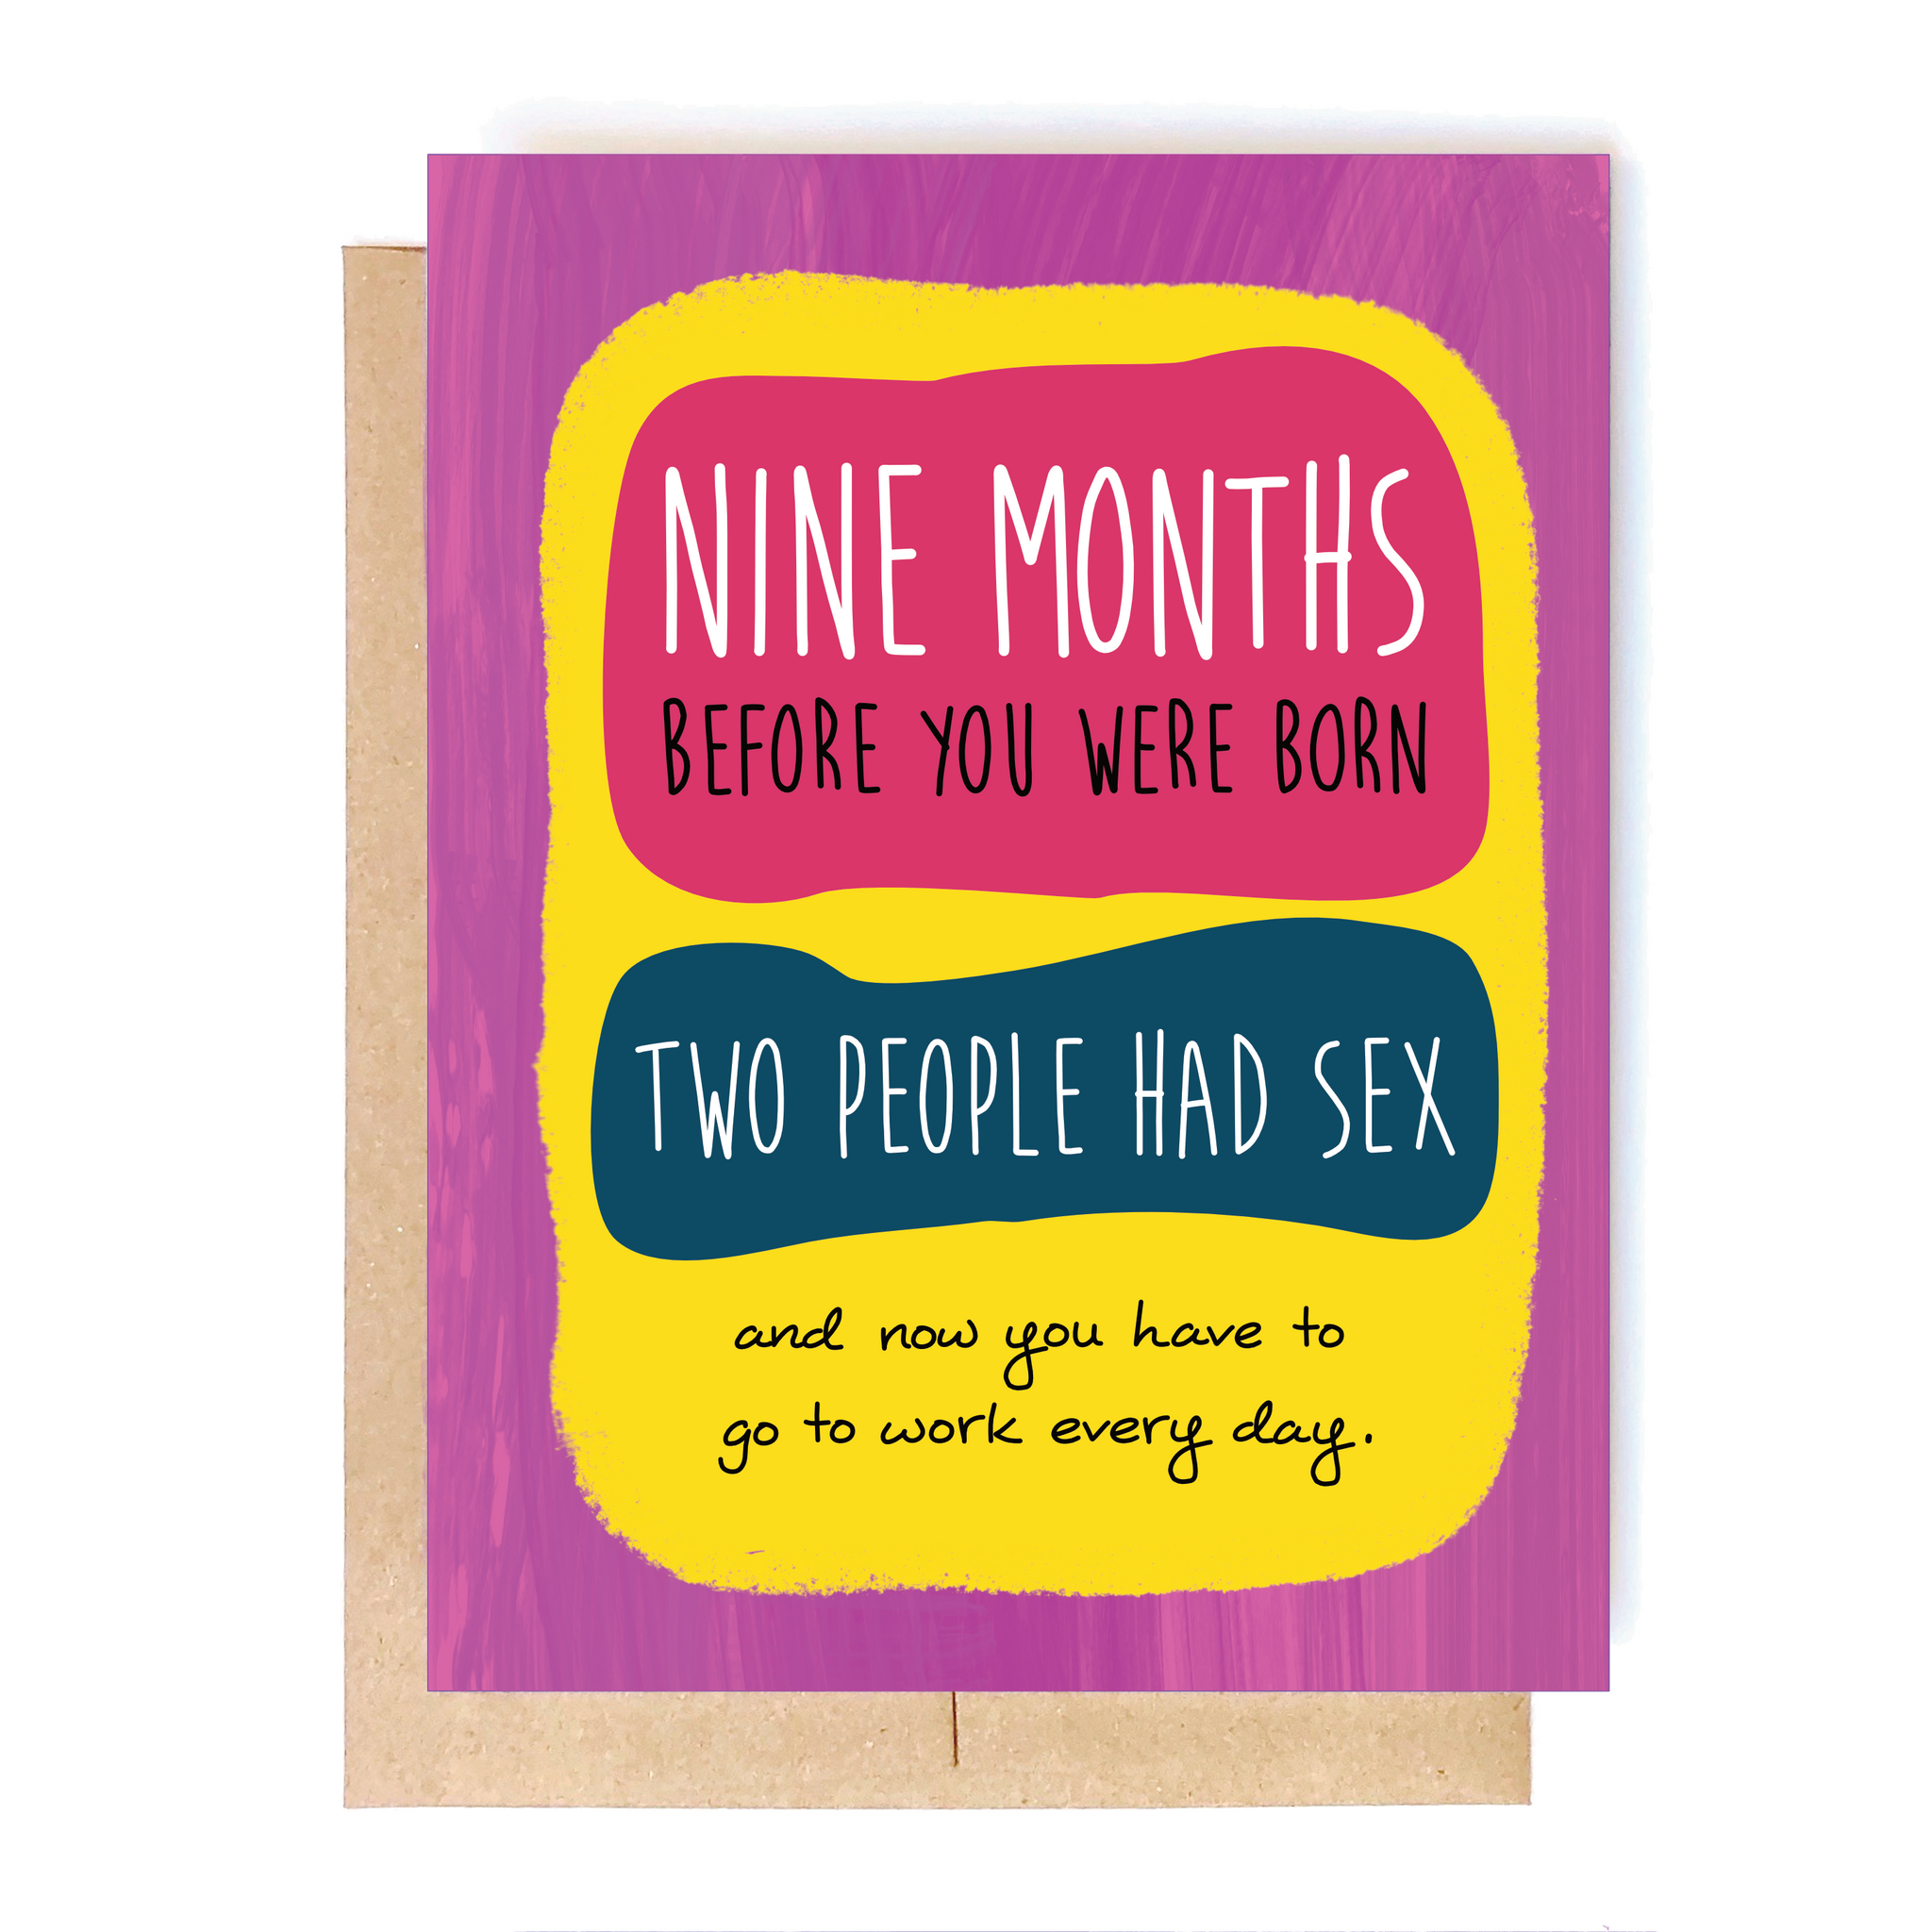 Card Front: Nine months before you were born, two people had sex. And now you have to go to work every day.